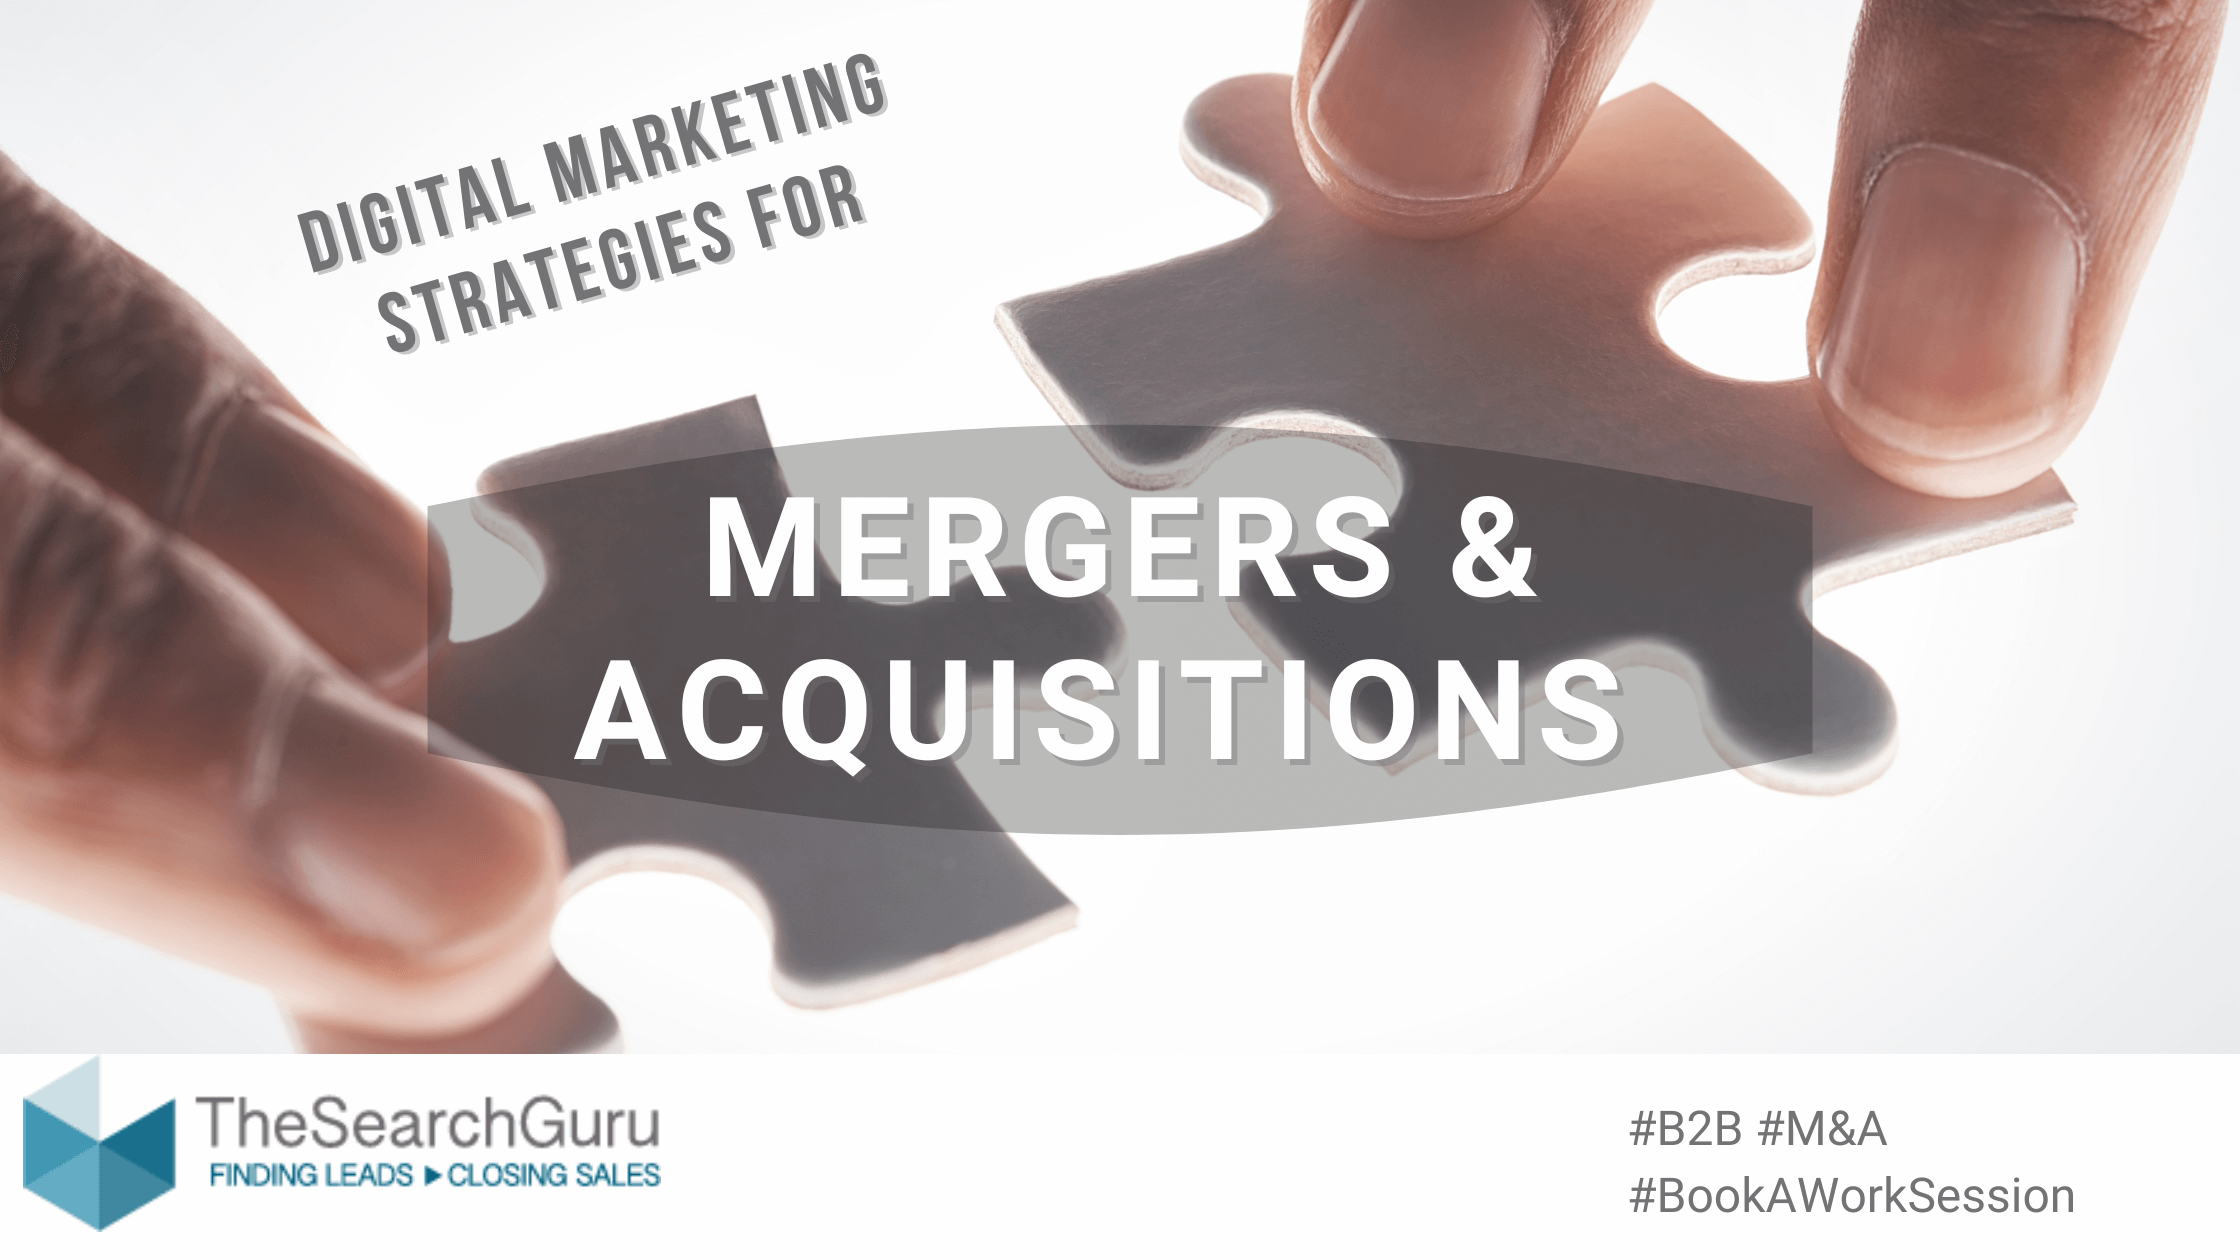 Marketing strategies for M&A